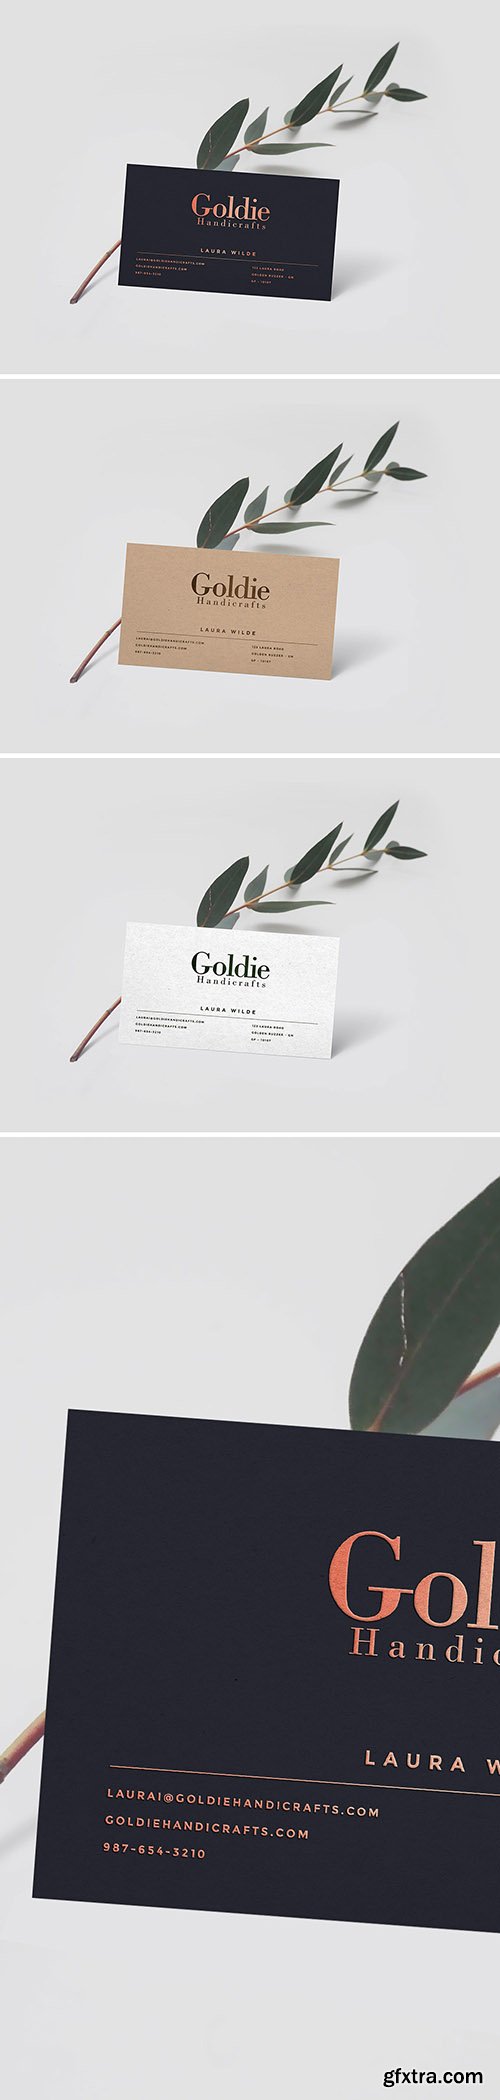 PSD Mock-Up - Realistic Business Card 2017